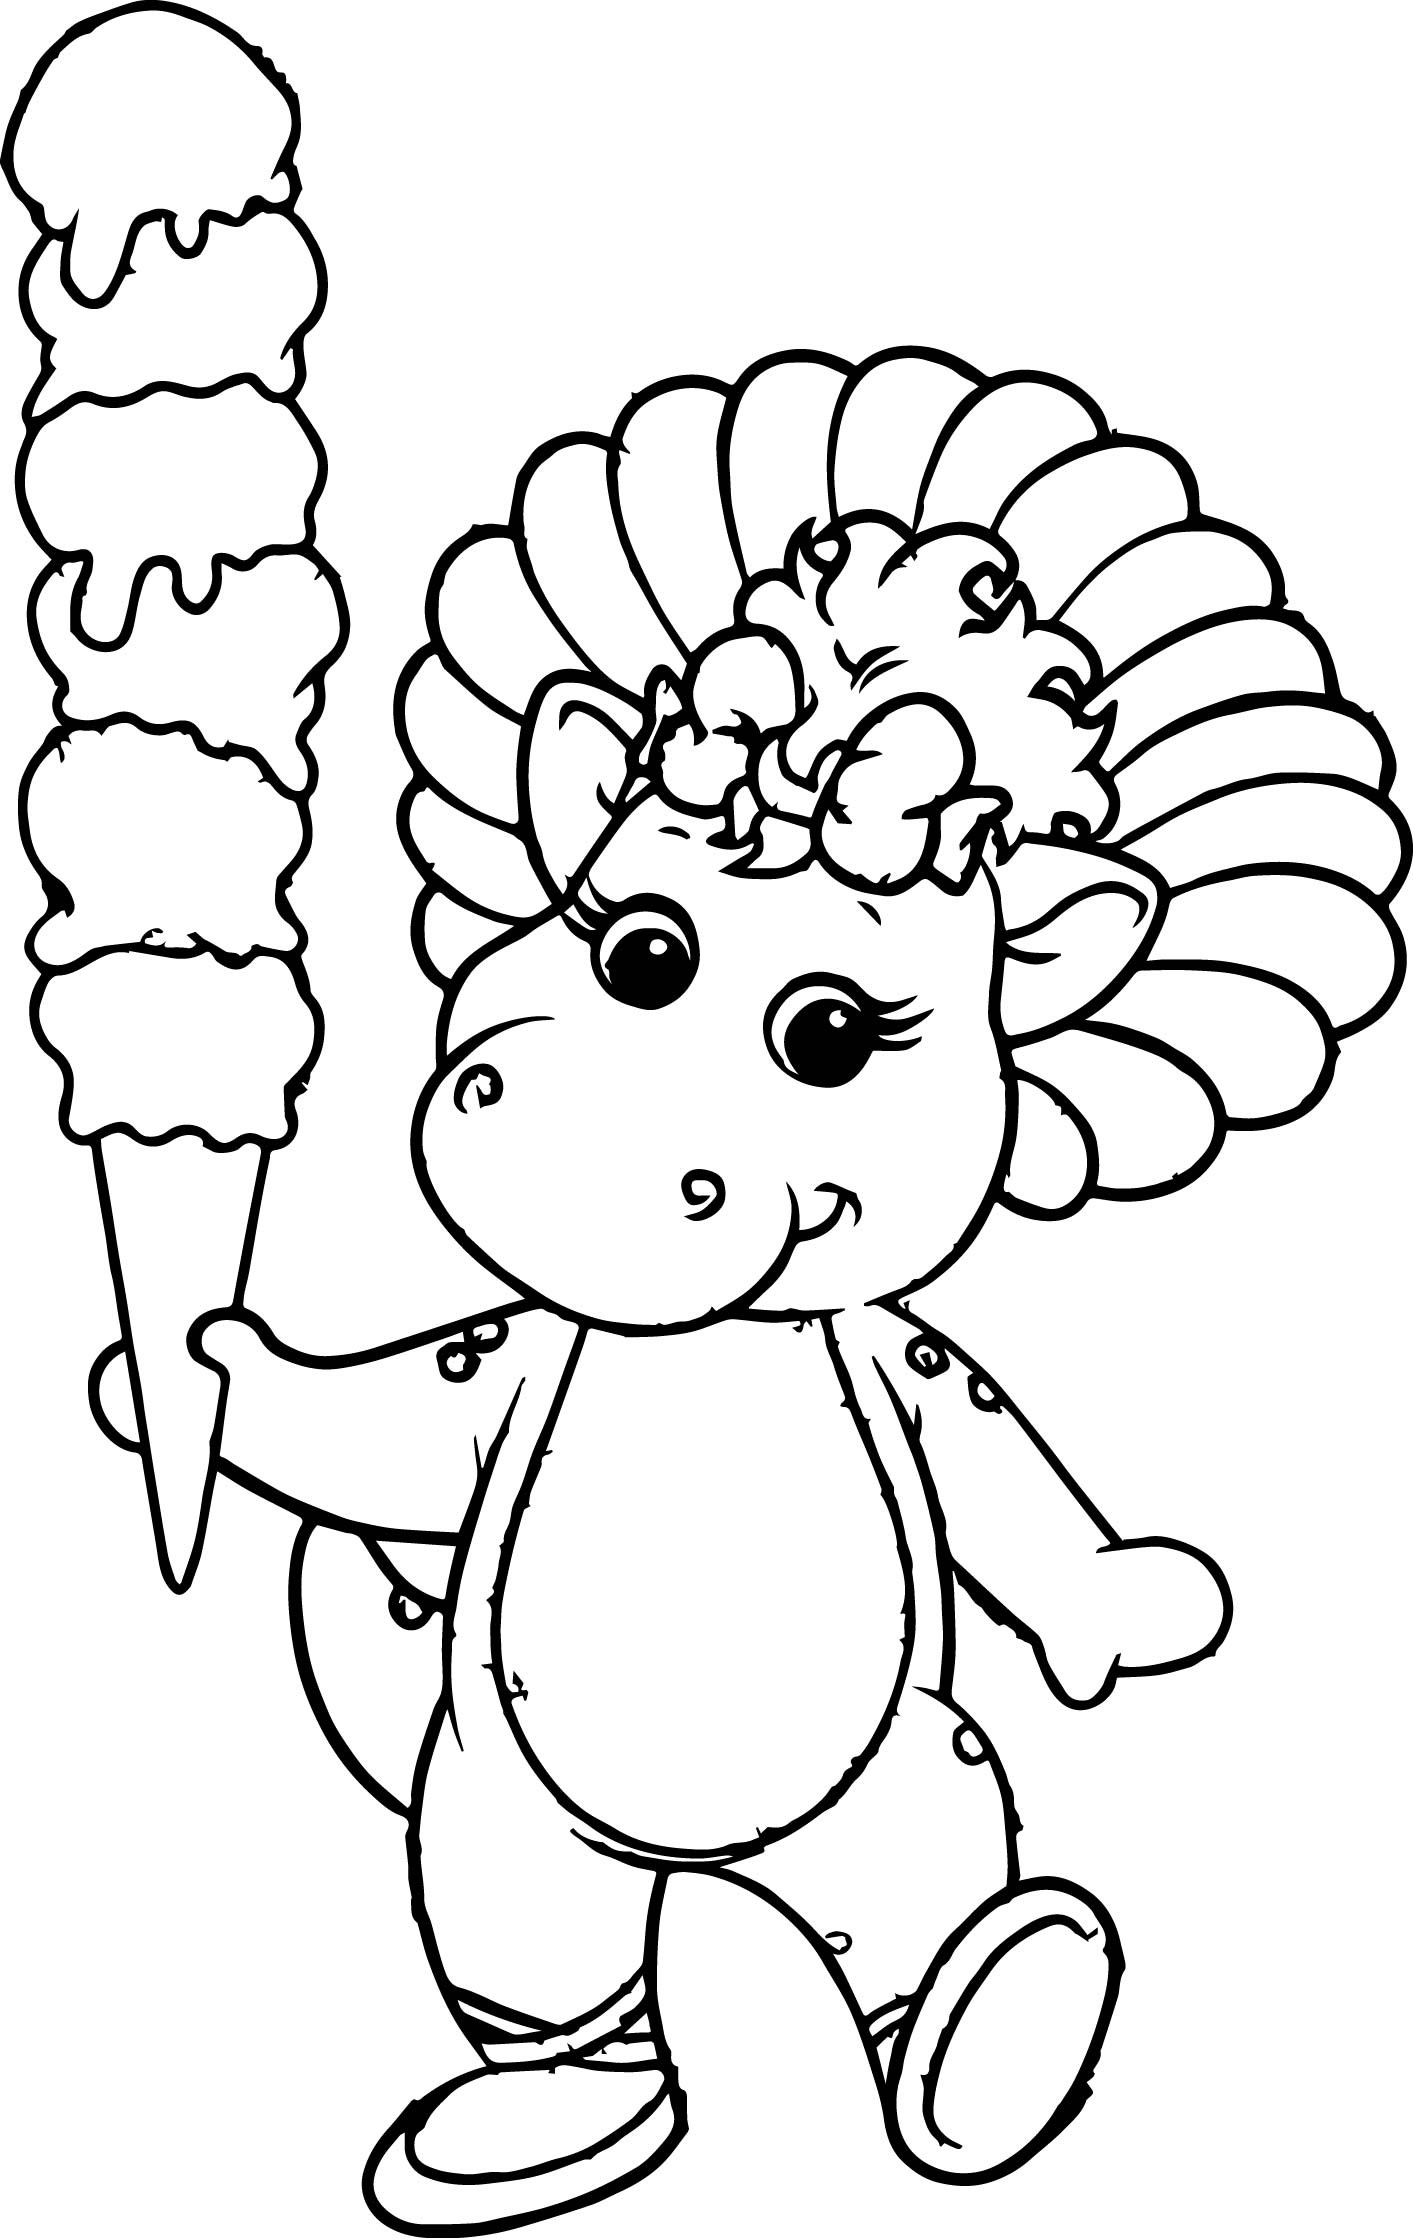 The best free Bop coloring page images. Download from 36 free ...